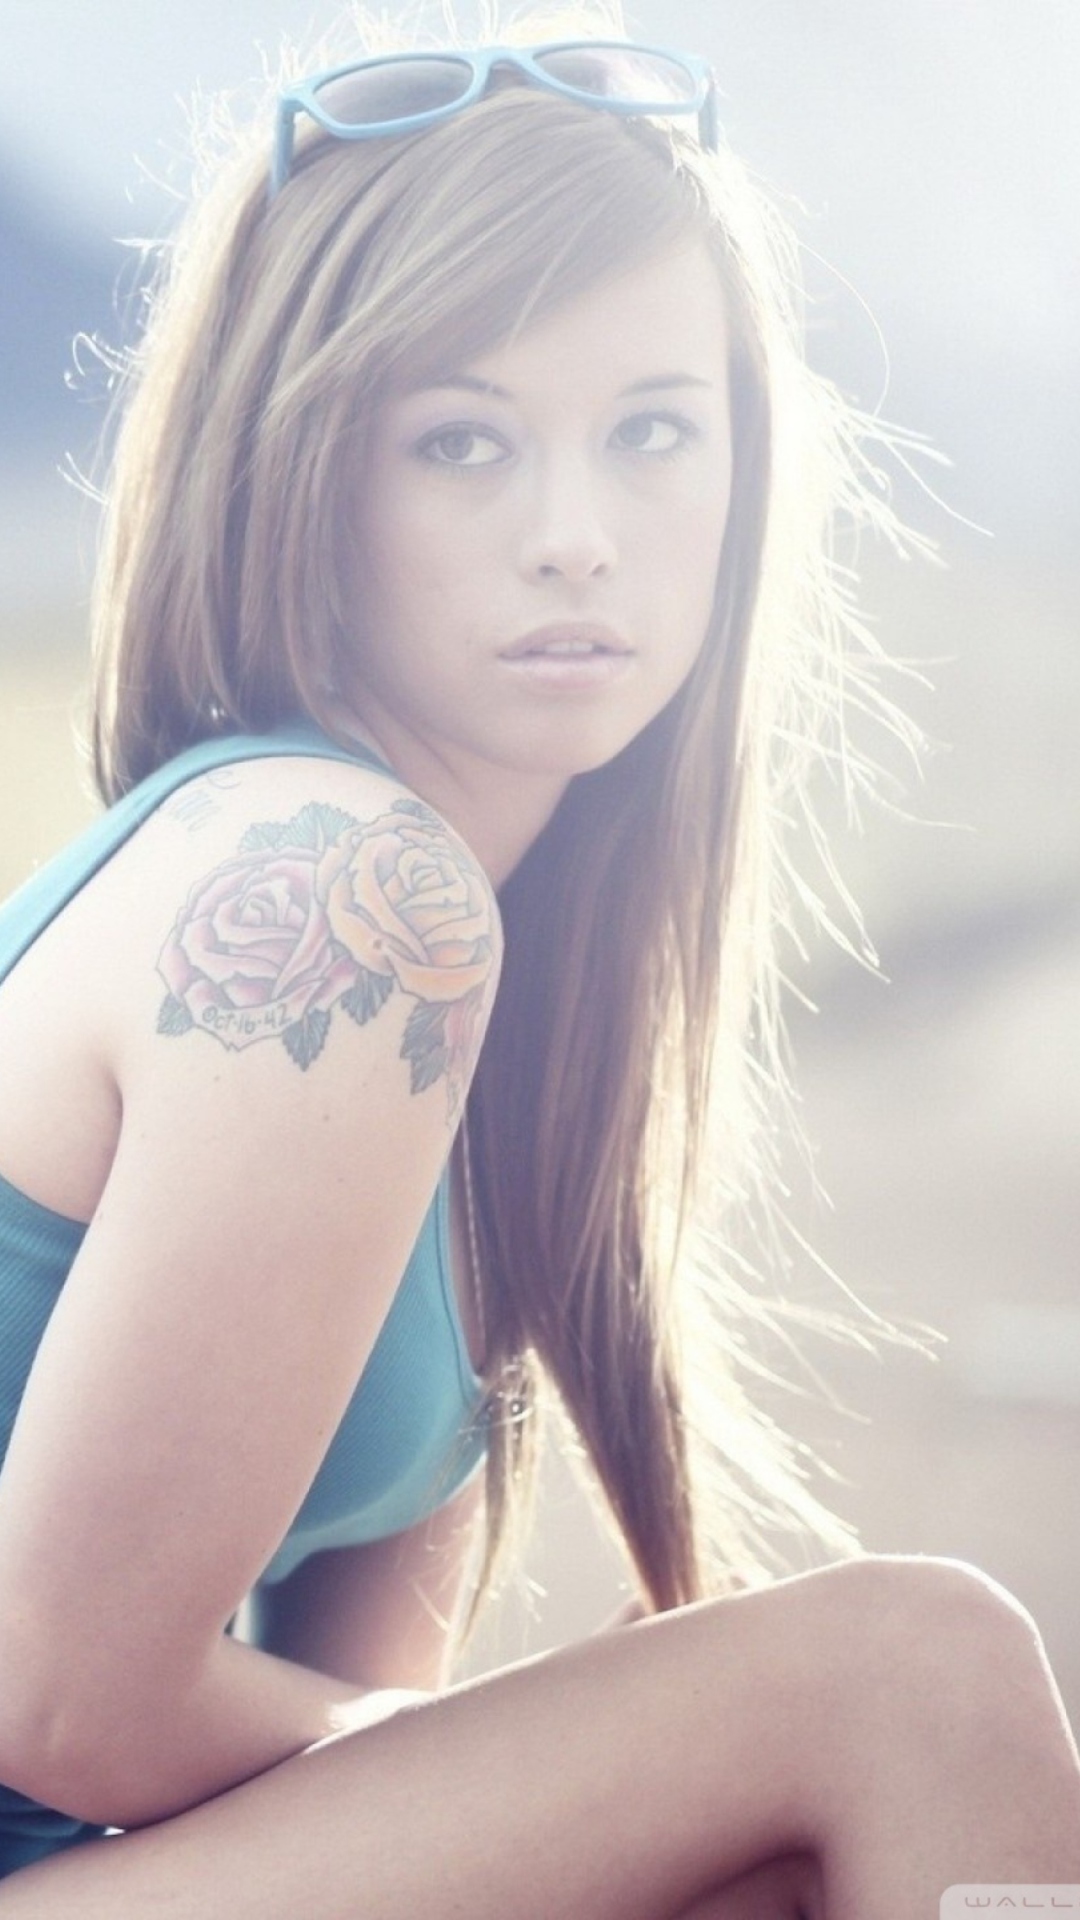 Das Beautiful Girl With Long Blonde Hair And Rose Tattoo Wallpaper 1080x1920